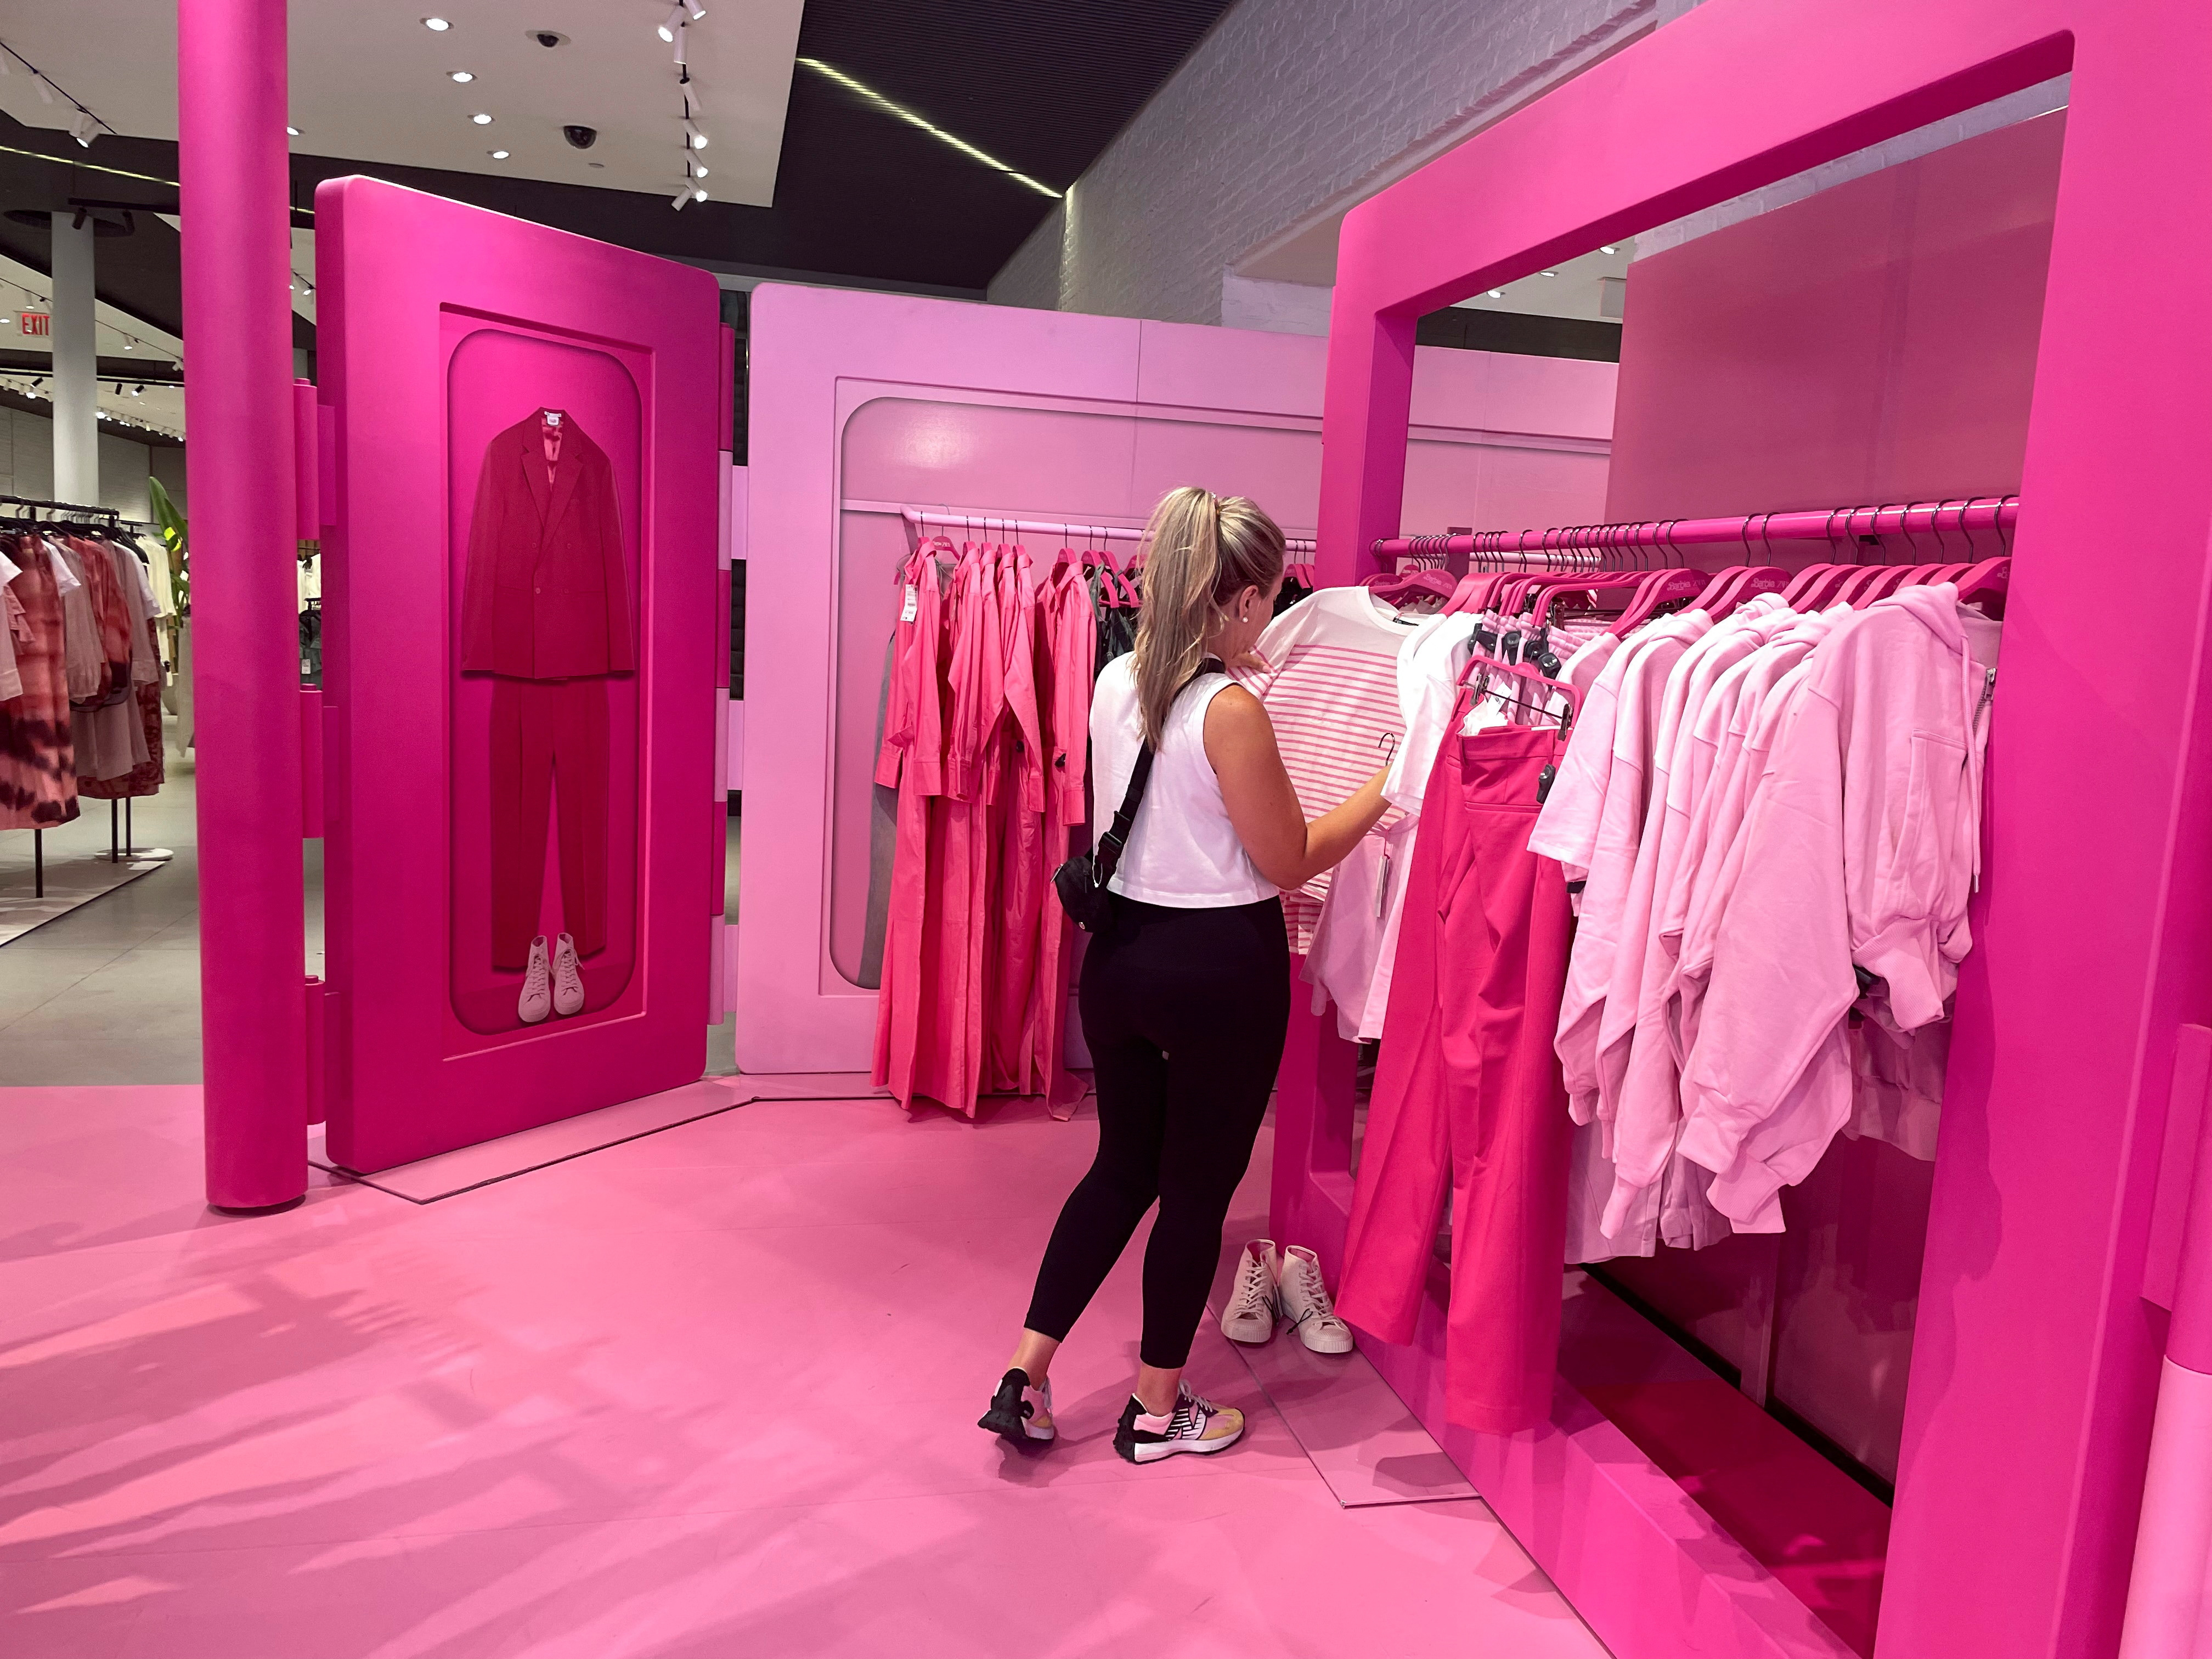 Shoppers browse Barbie-themed merchandise during the Barbie pop-up in Zara's Soho store in New York